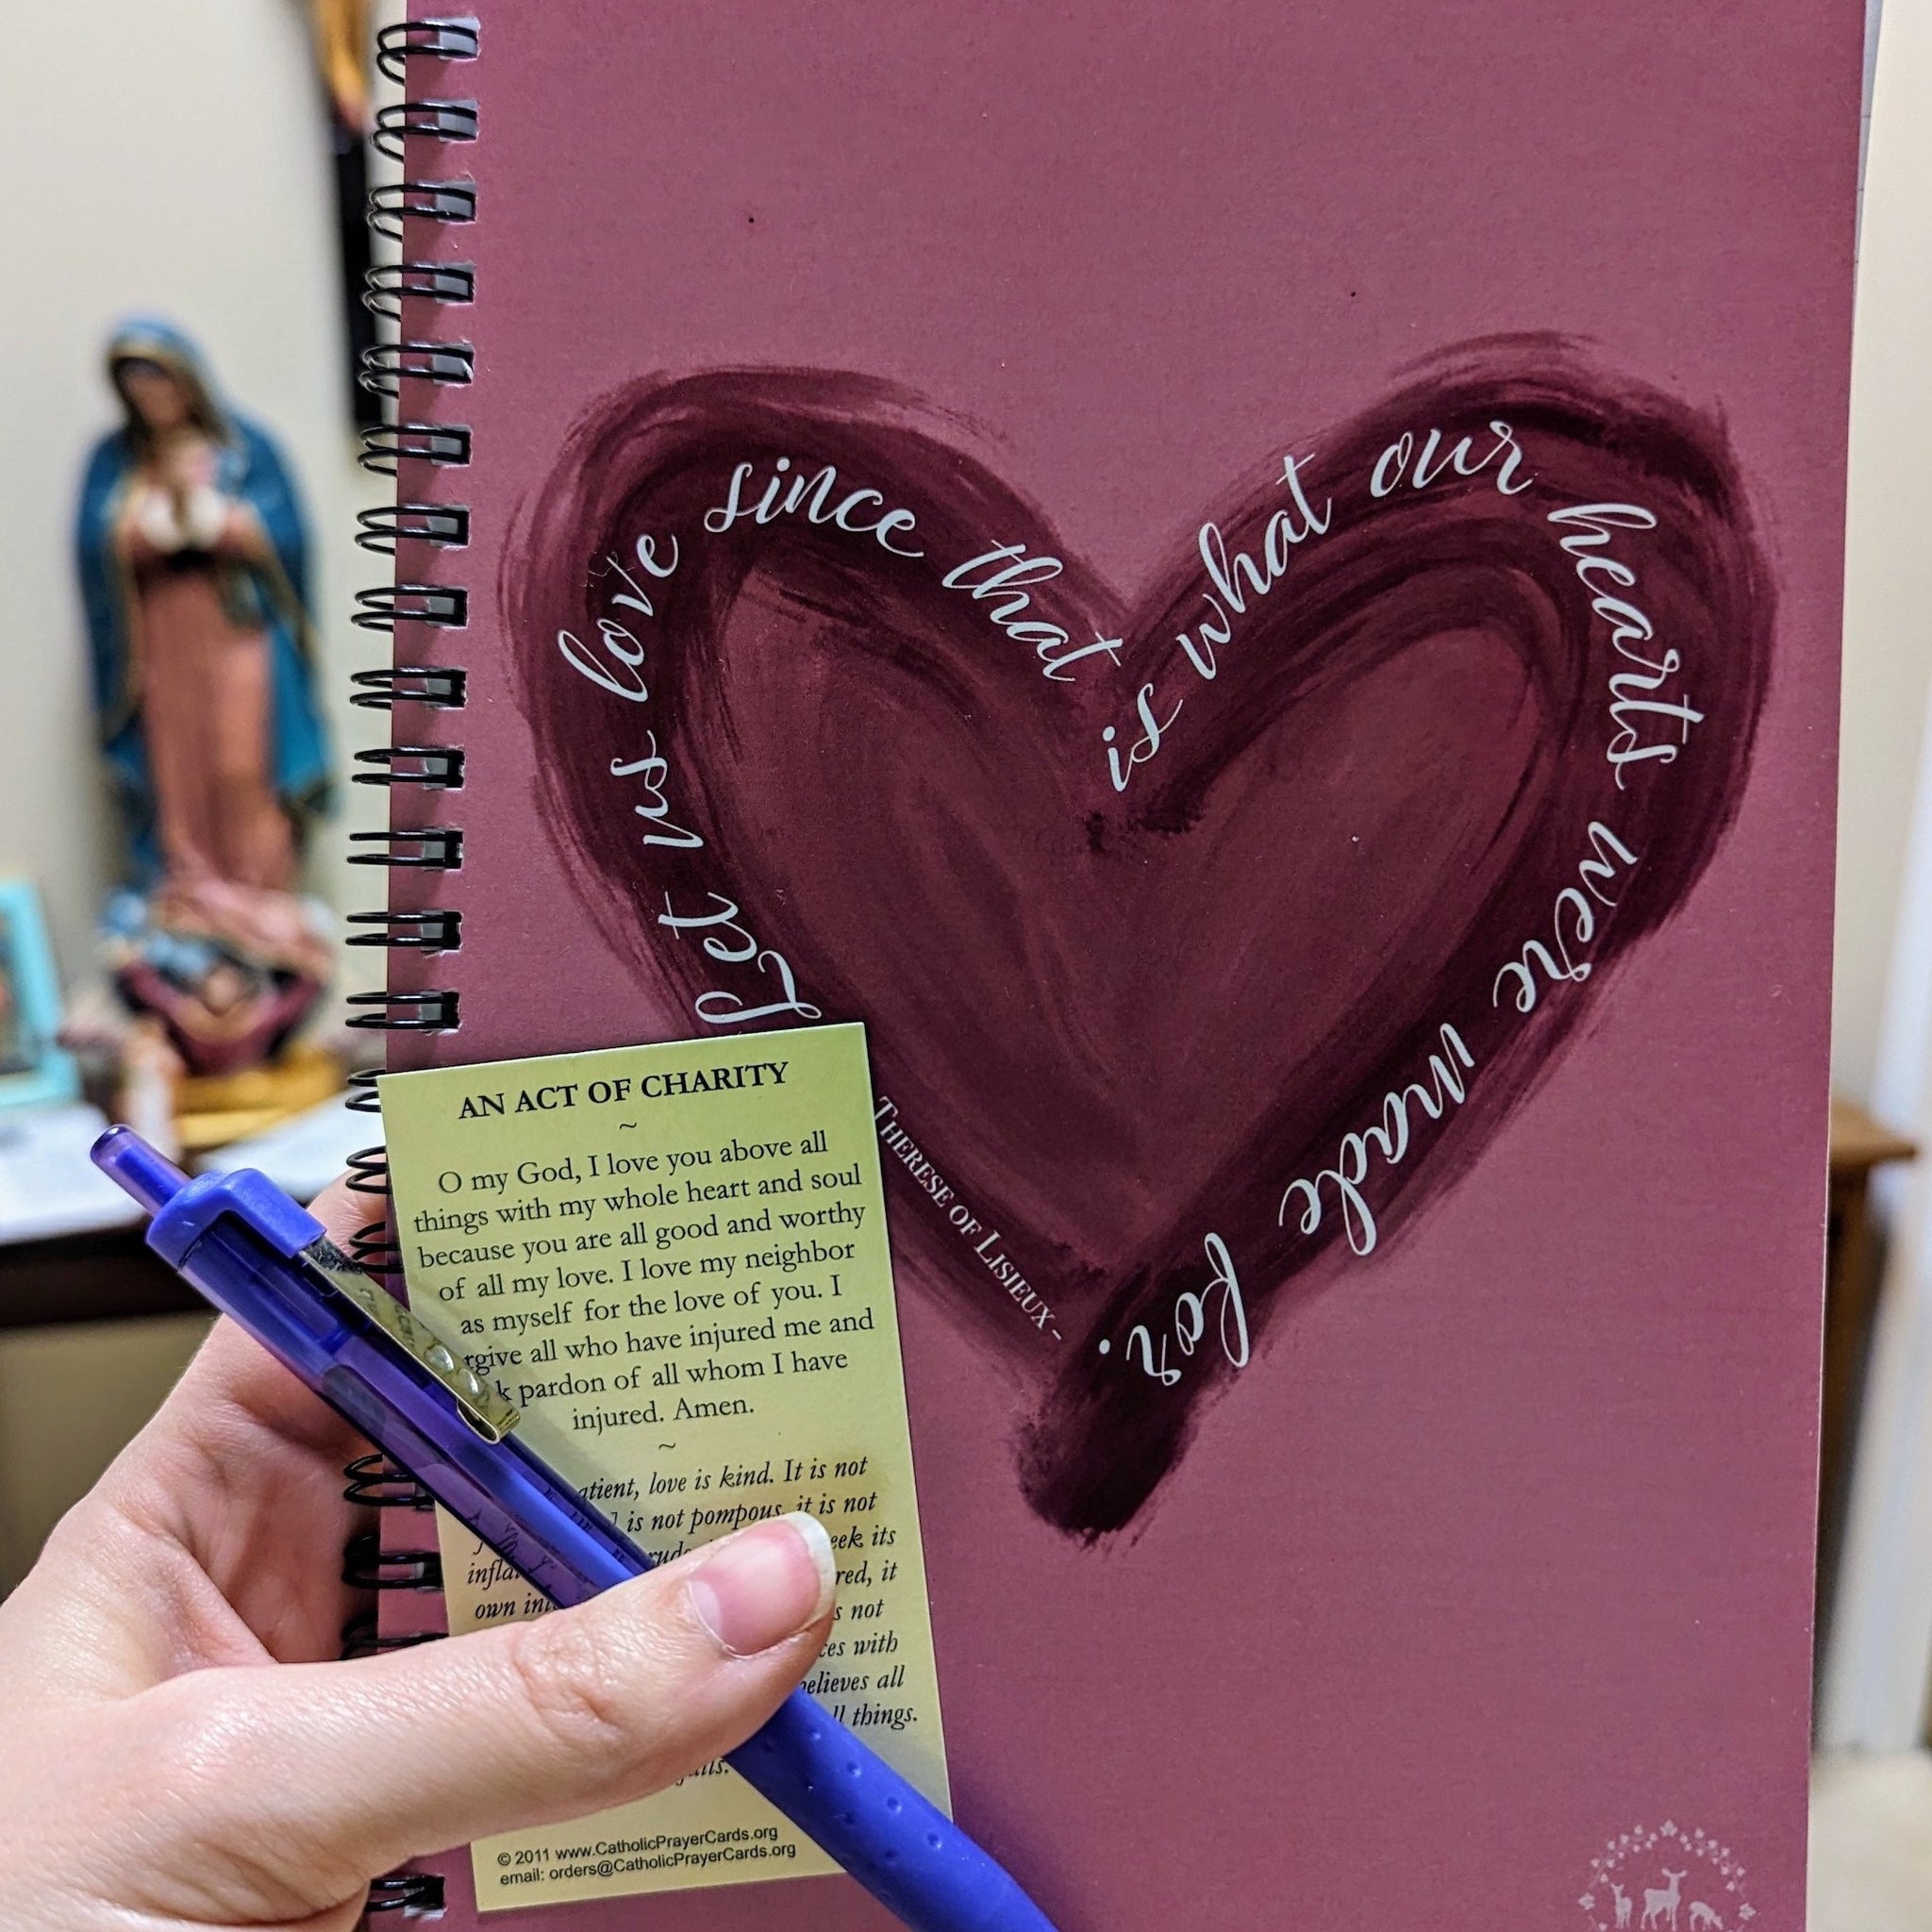 A Catholic notebook or journal with a heart on it and the St. Therese of Lisieux quote "Let us love since that is what our hearts were made for." The hand holding the notebook is also holding a pen and a Holy Card with the prayer "An Act of Charity" on it. 